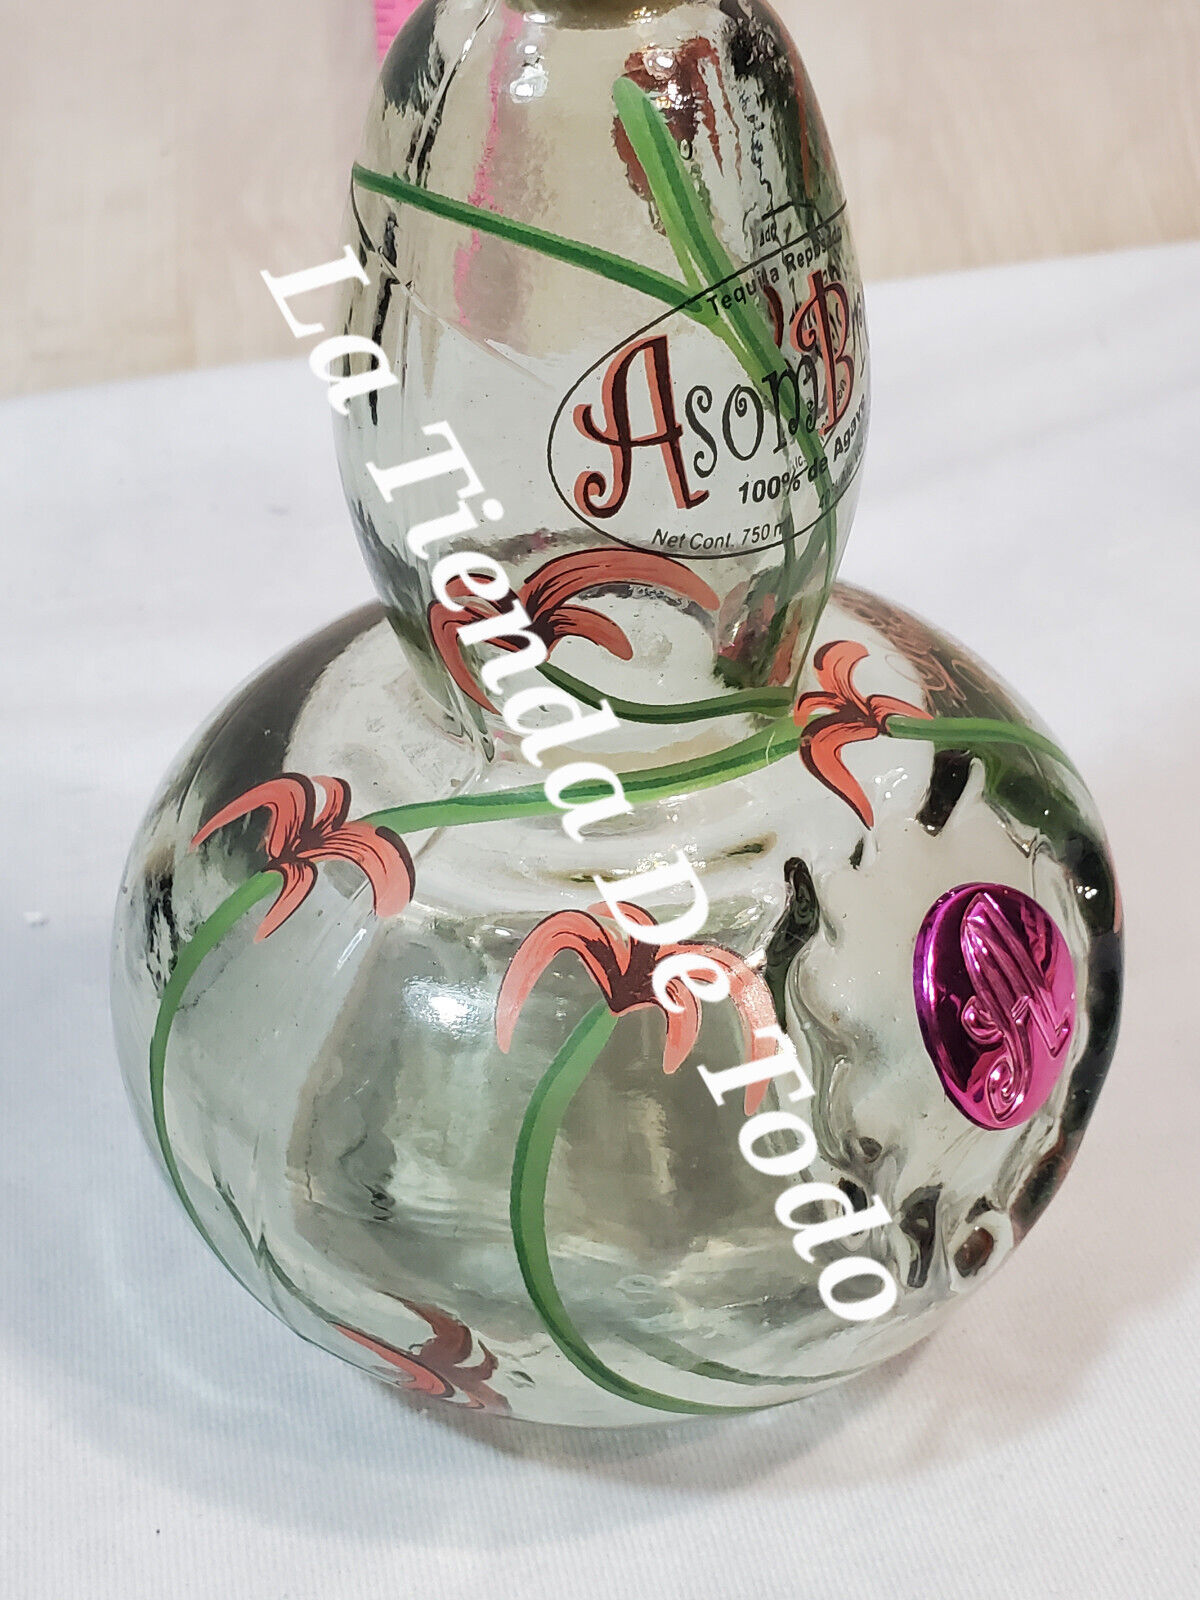 EMPTY GLASS TEQUILA BOTTLE IN SHAPE OF A GOURD OR BULITO FOR ASOMBROSO FANS